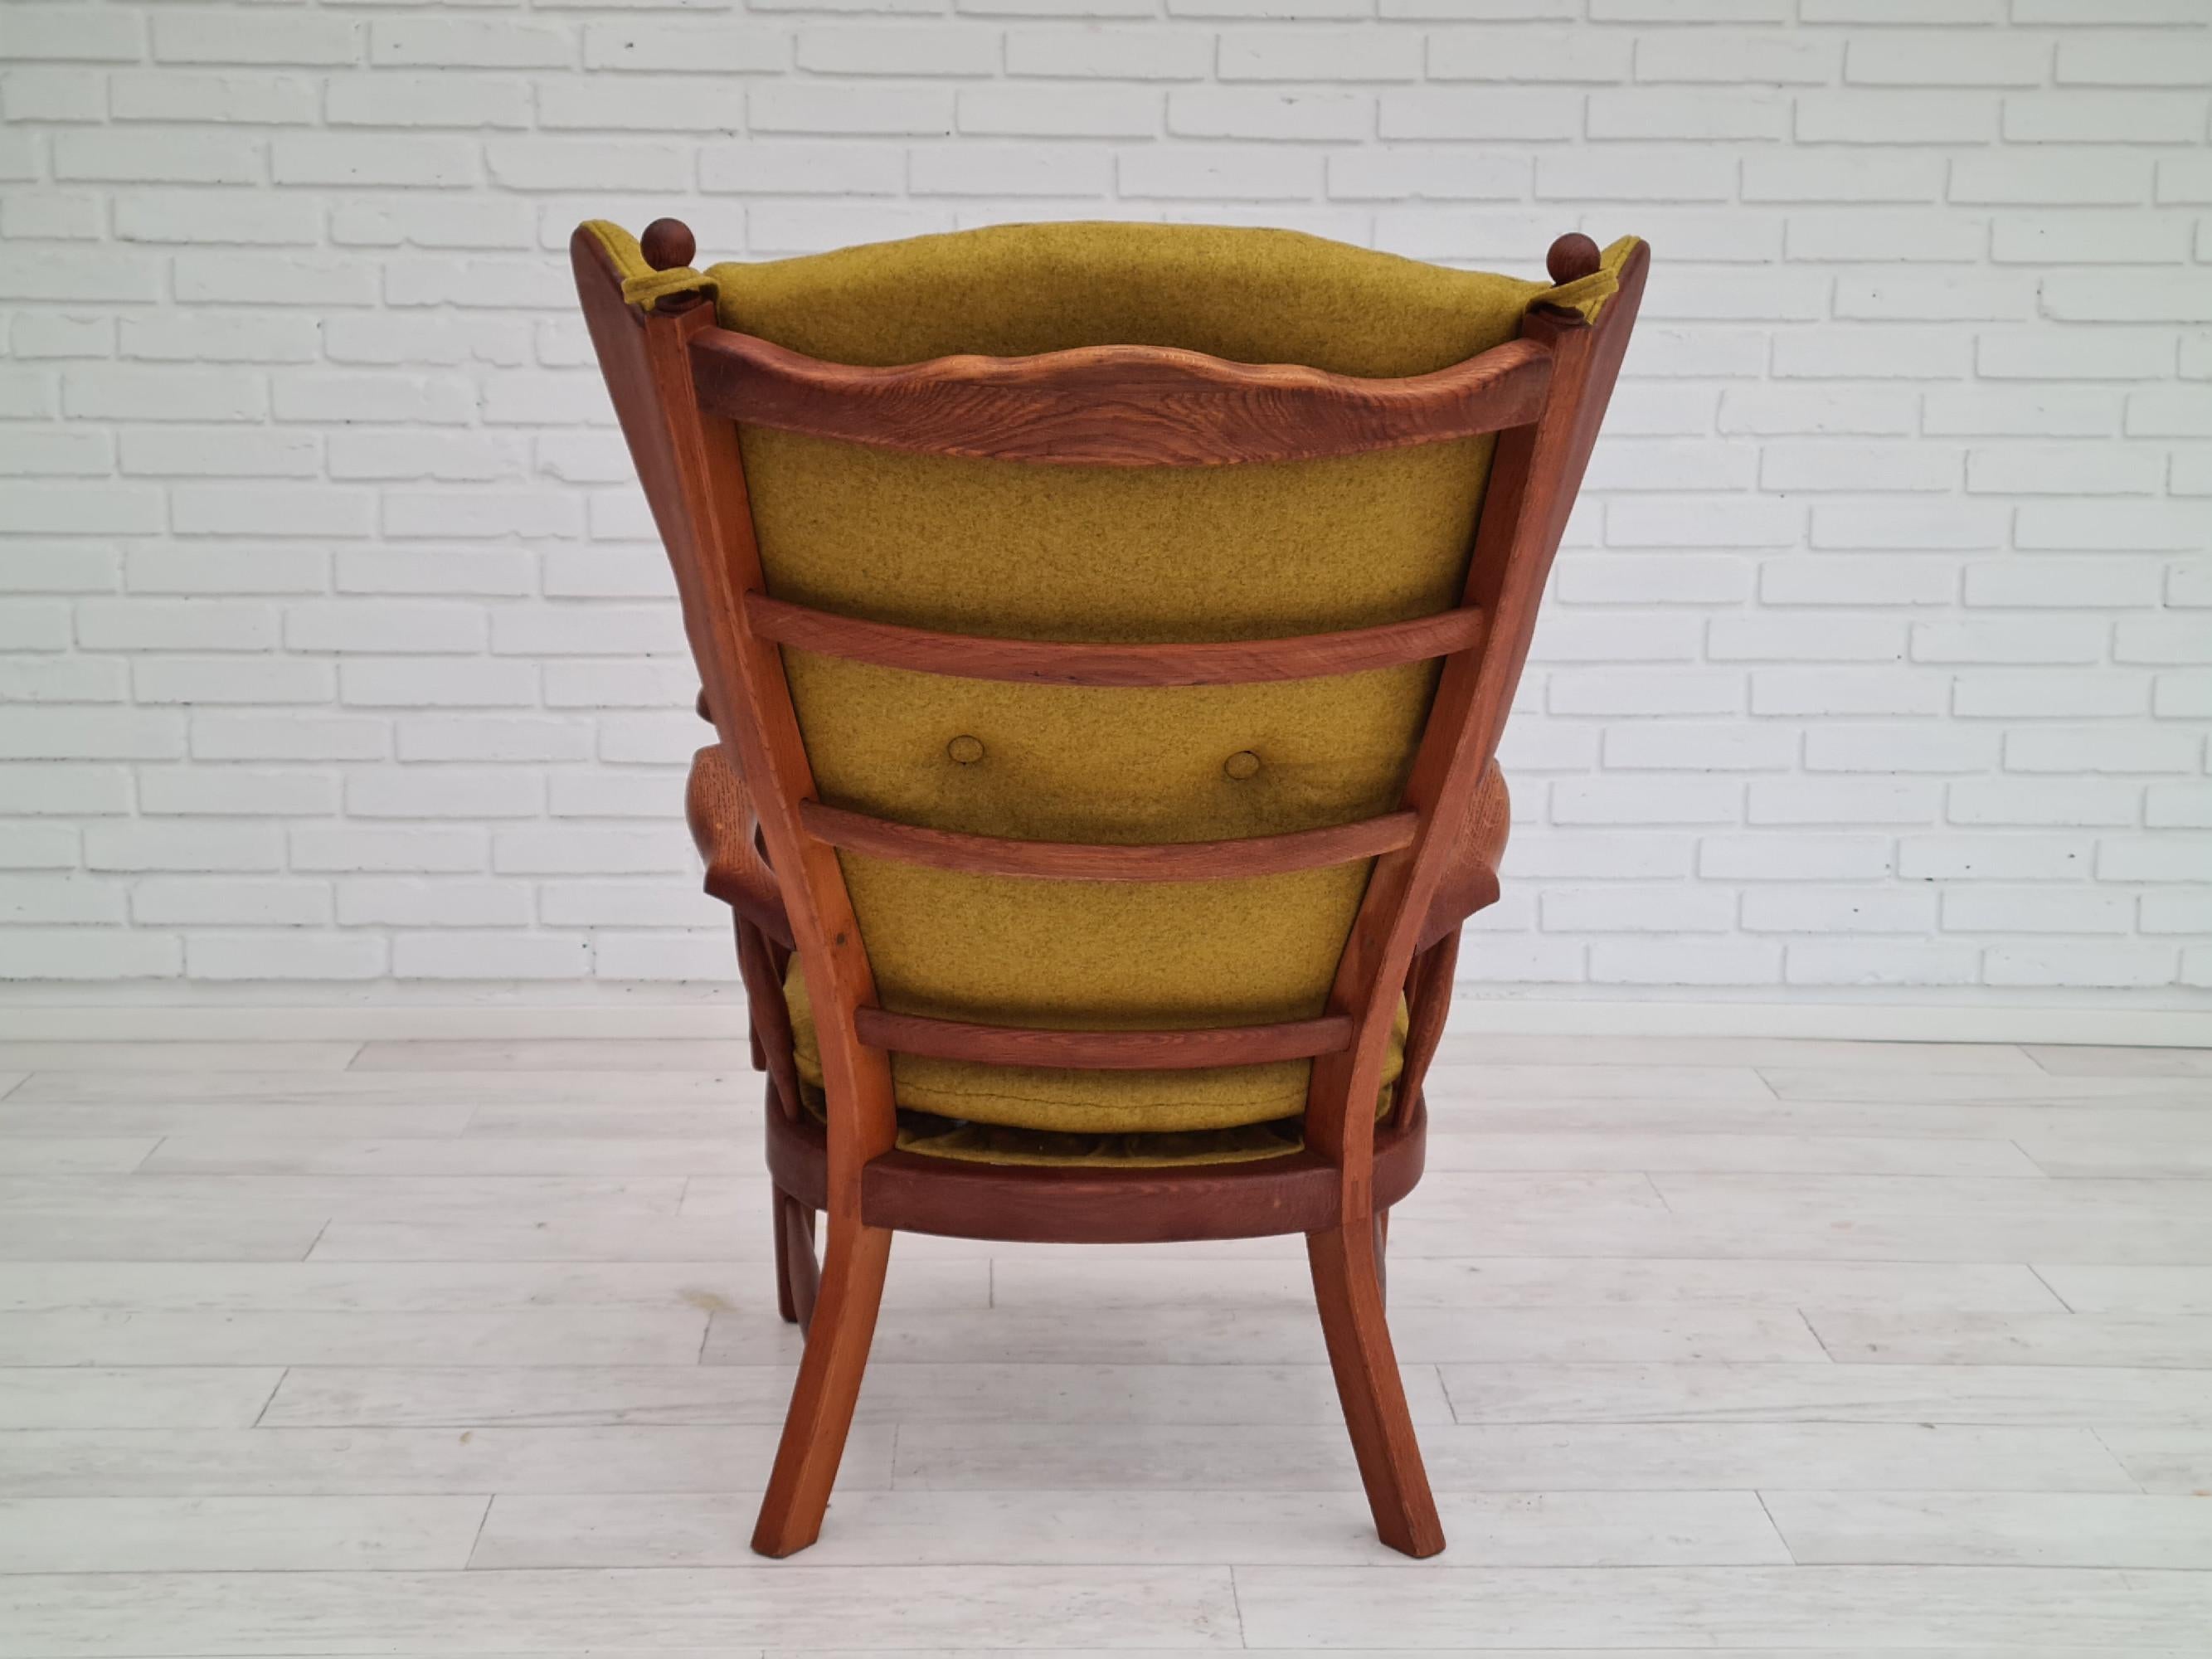 60s, reupholstered Danish high-backed ear flap chair, solid oak, furniture wool 1